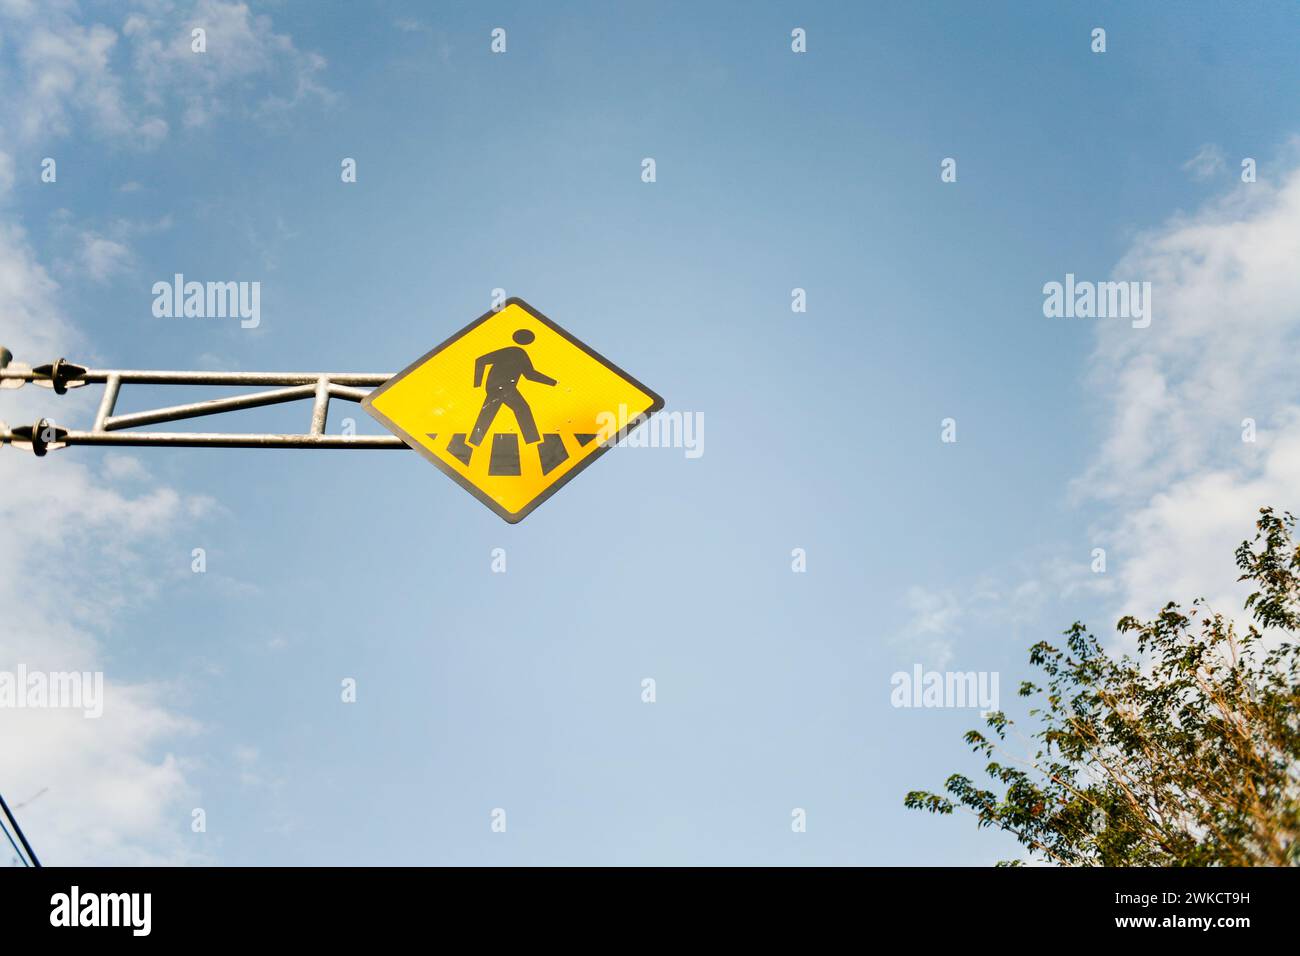 Yellow crossing sign on the road in Kediri, East Java, Indonesia Stock Photo